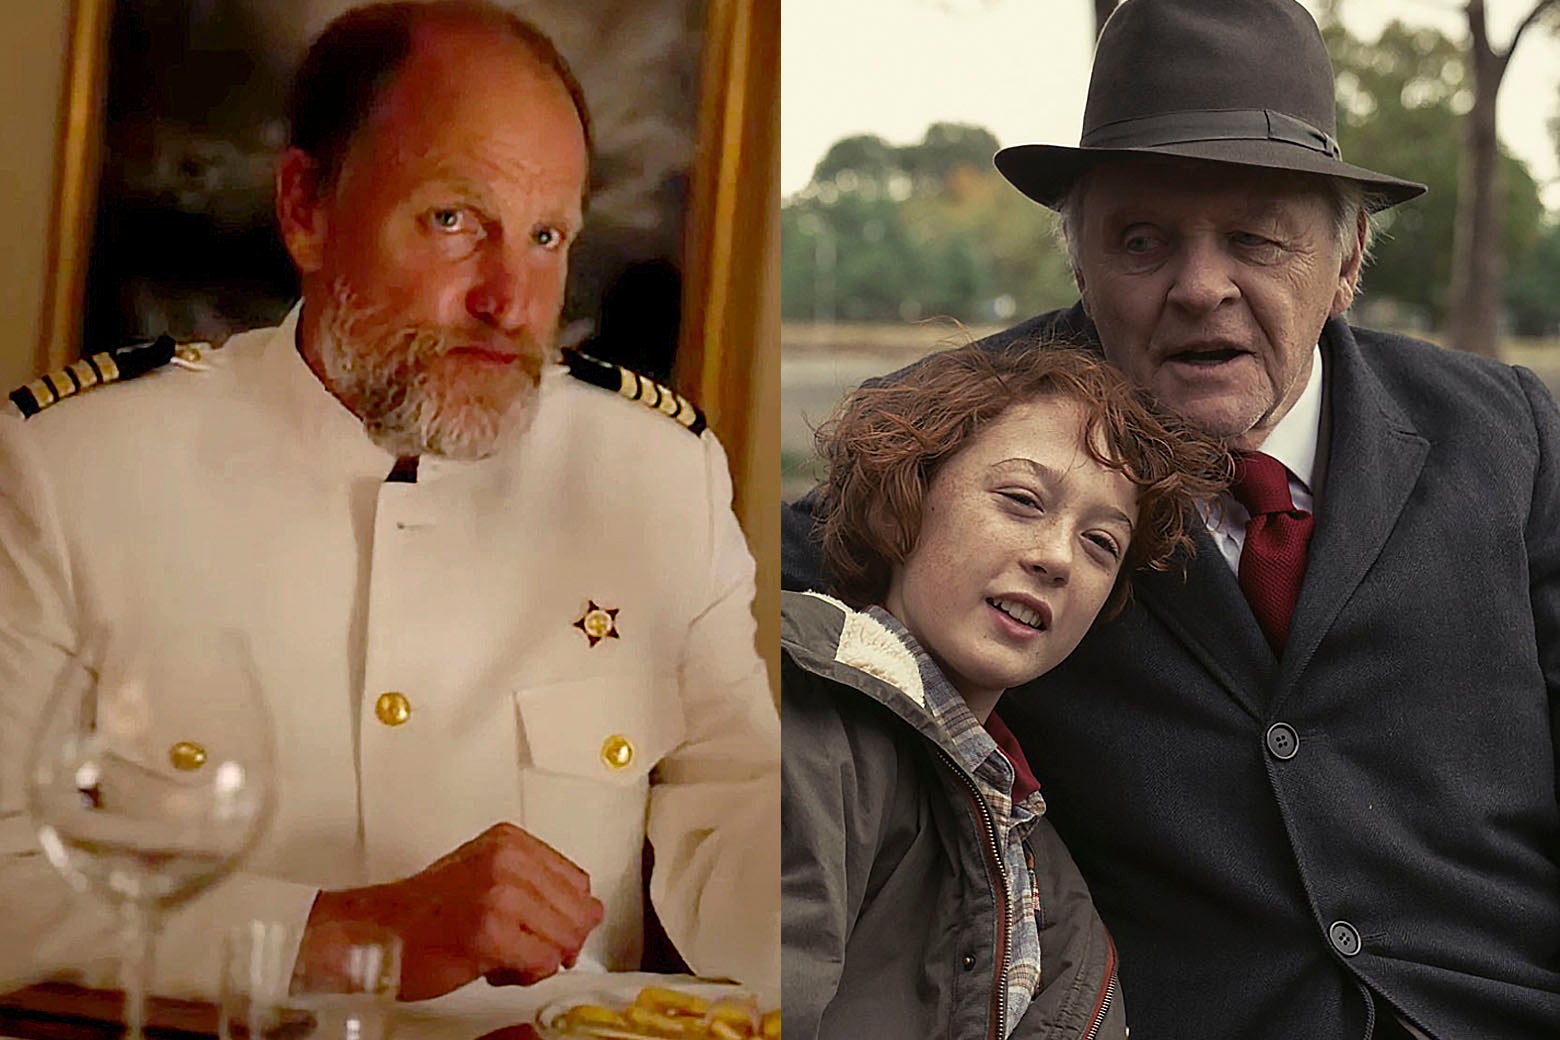 Side by side stills of Harrelson in a fancy white captain's uniform with a fancy dinner in front of him and Hopkins in old-timey garb pulling a boy close on a park bench